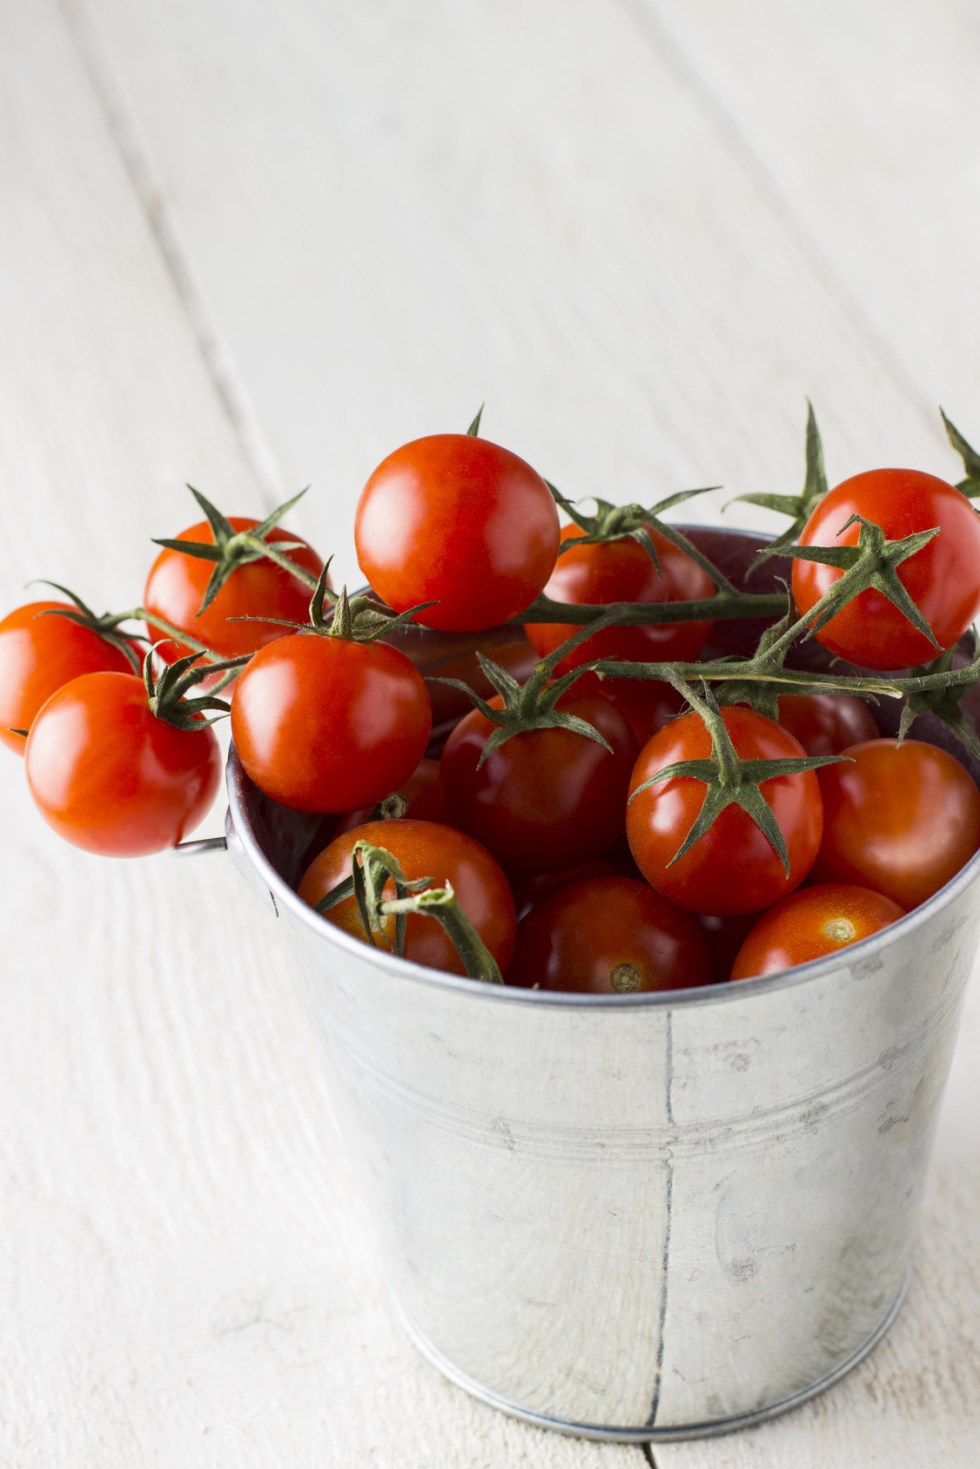 Cherry tomatoes on branch in metal bucket on a wooden background